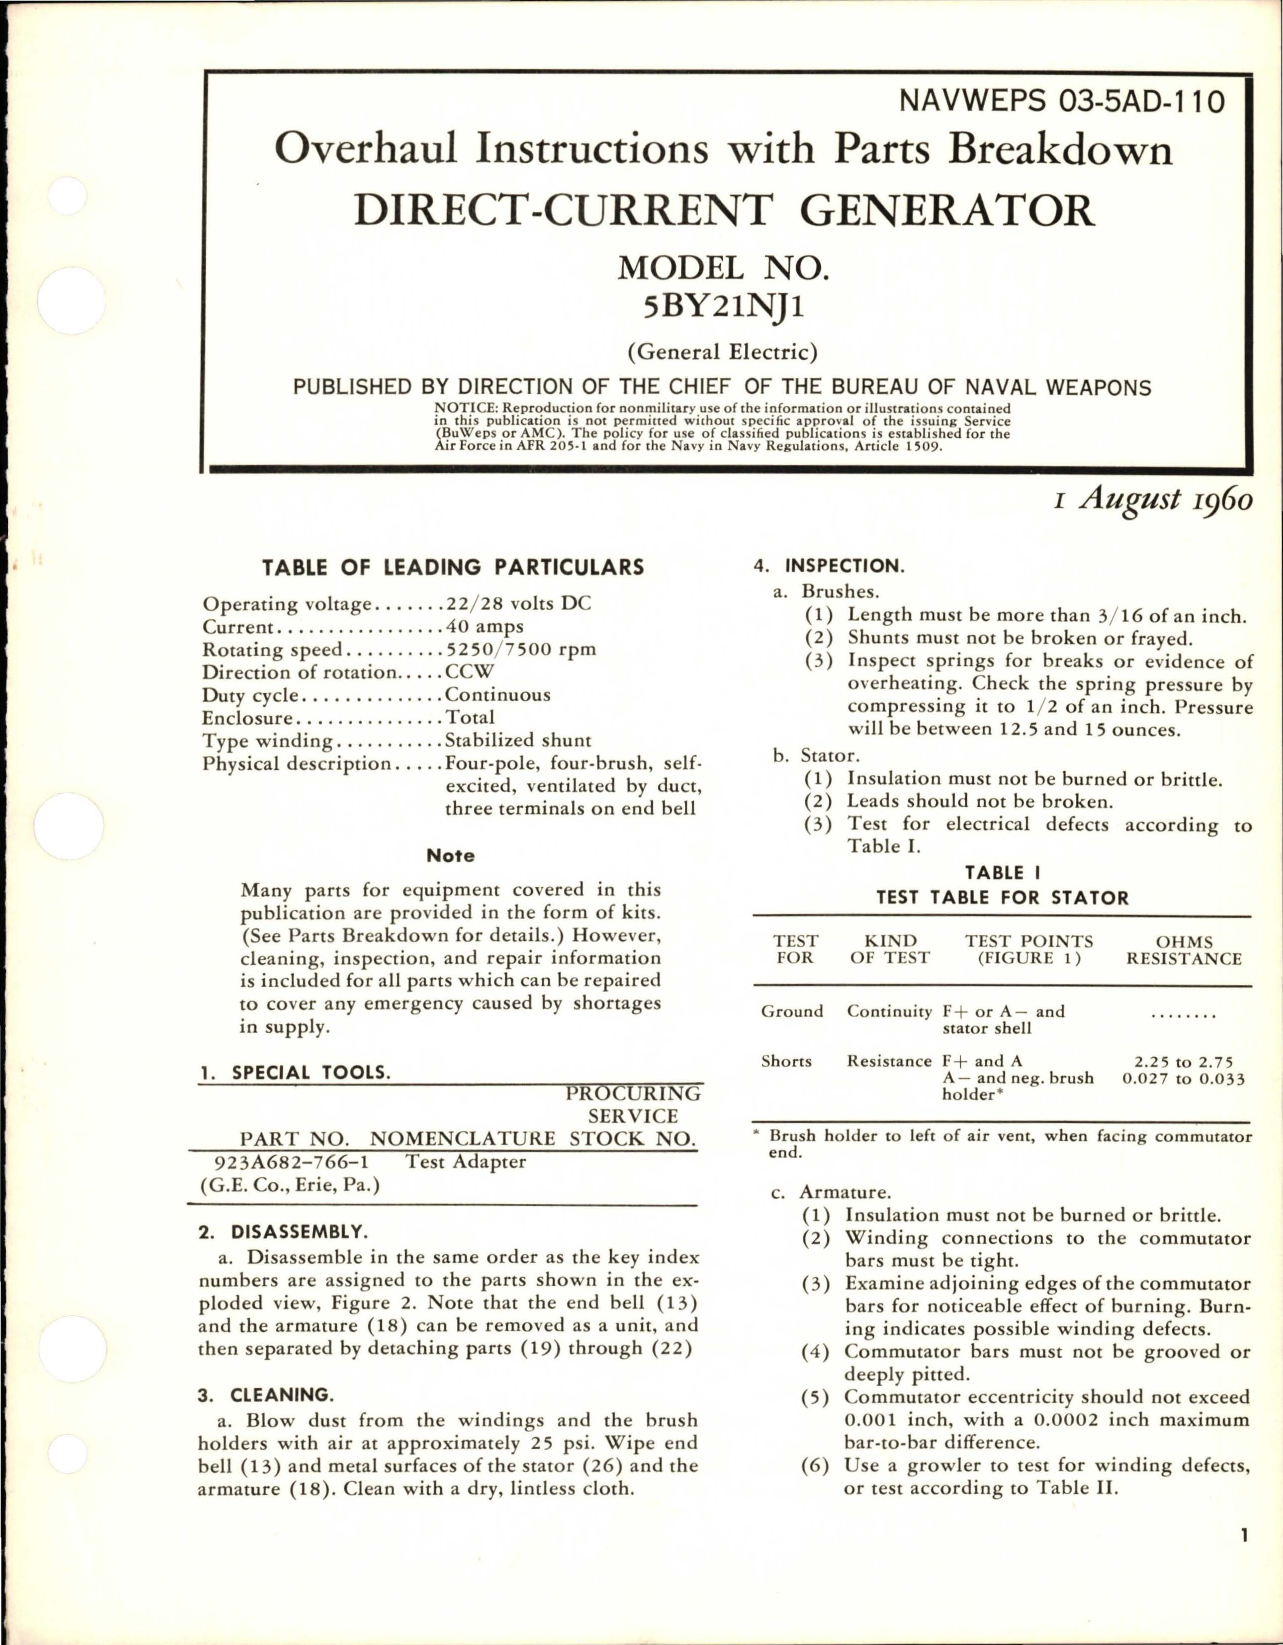 Sample page 1 from AirCorps Library document: Overhaul Instructions with Parts Breakdown for Direct Current Generator - Model 5BY21NJ1 